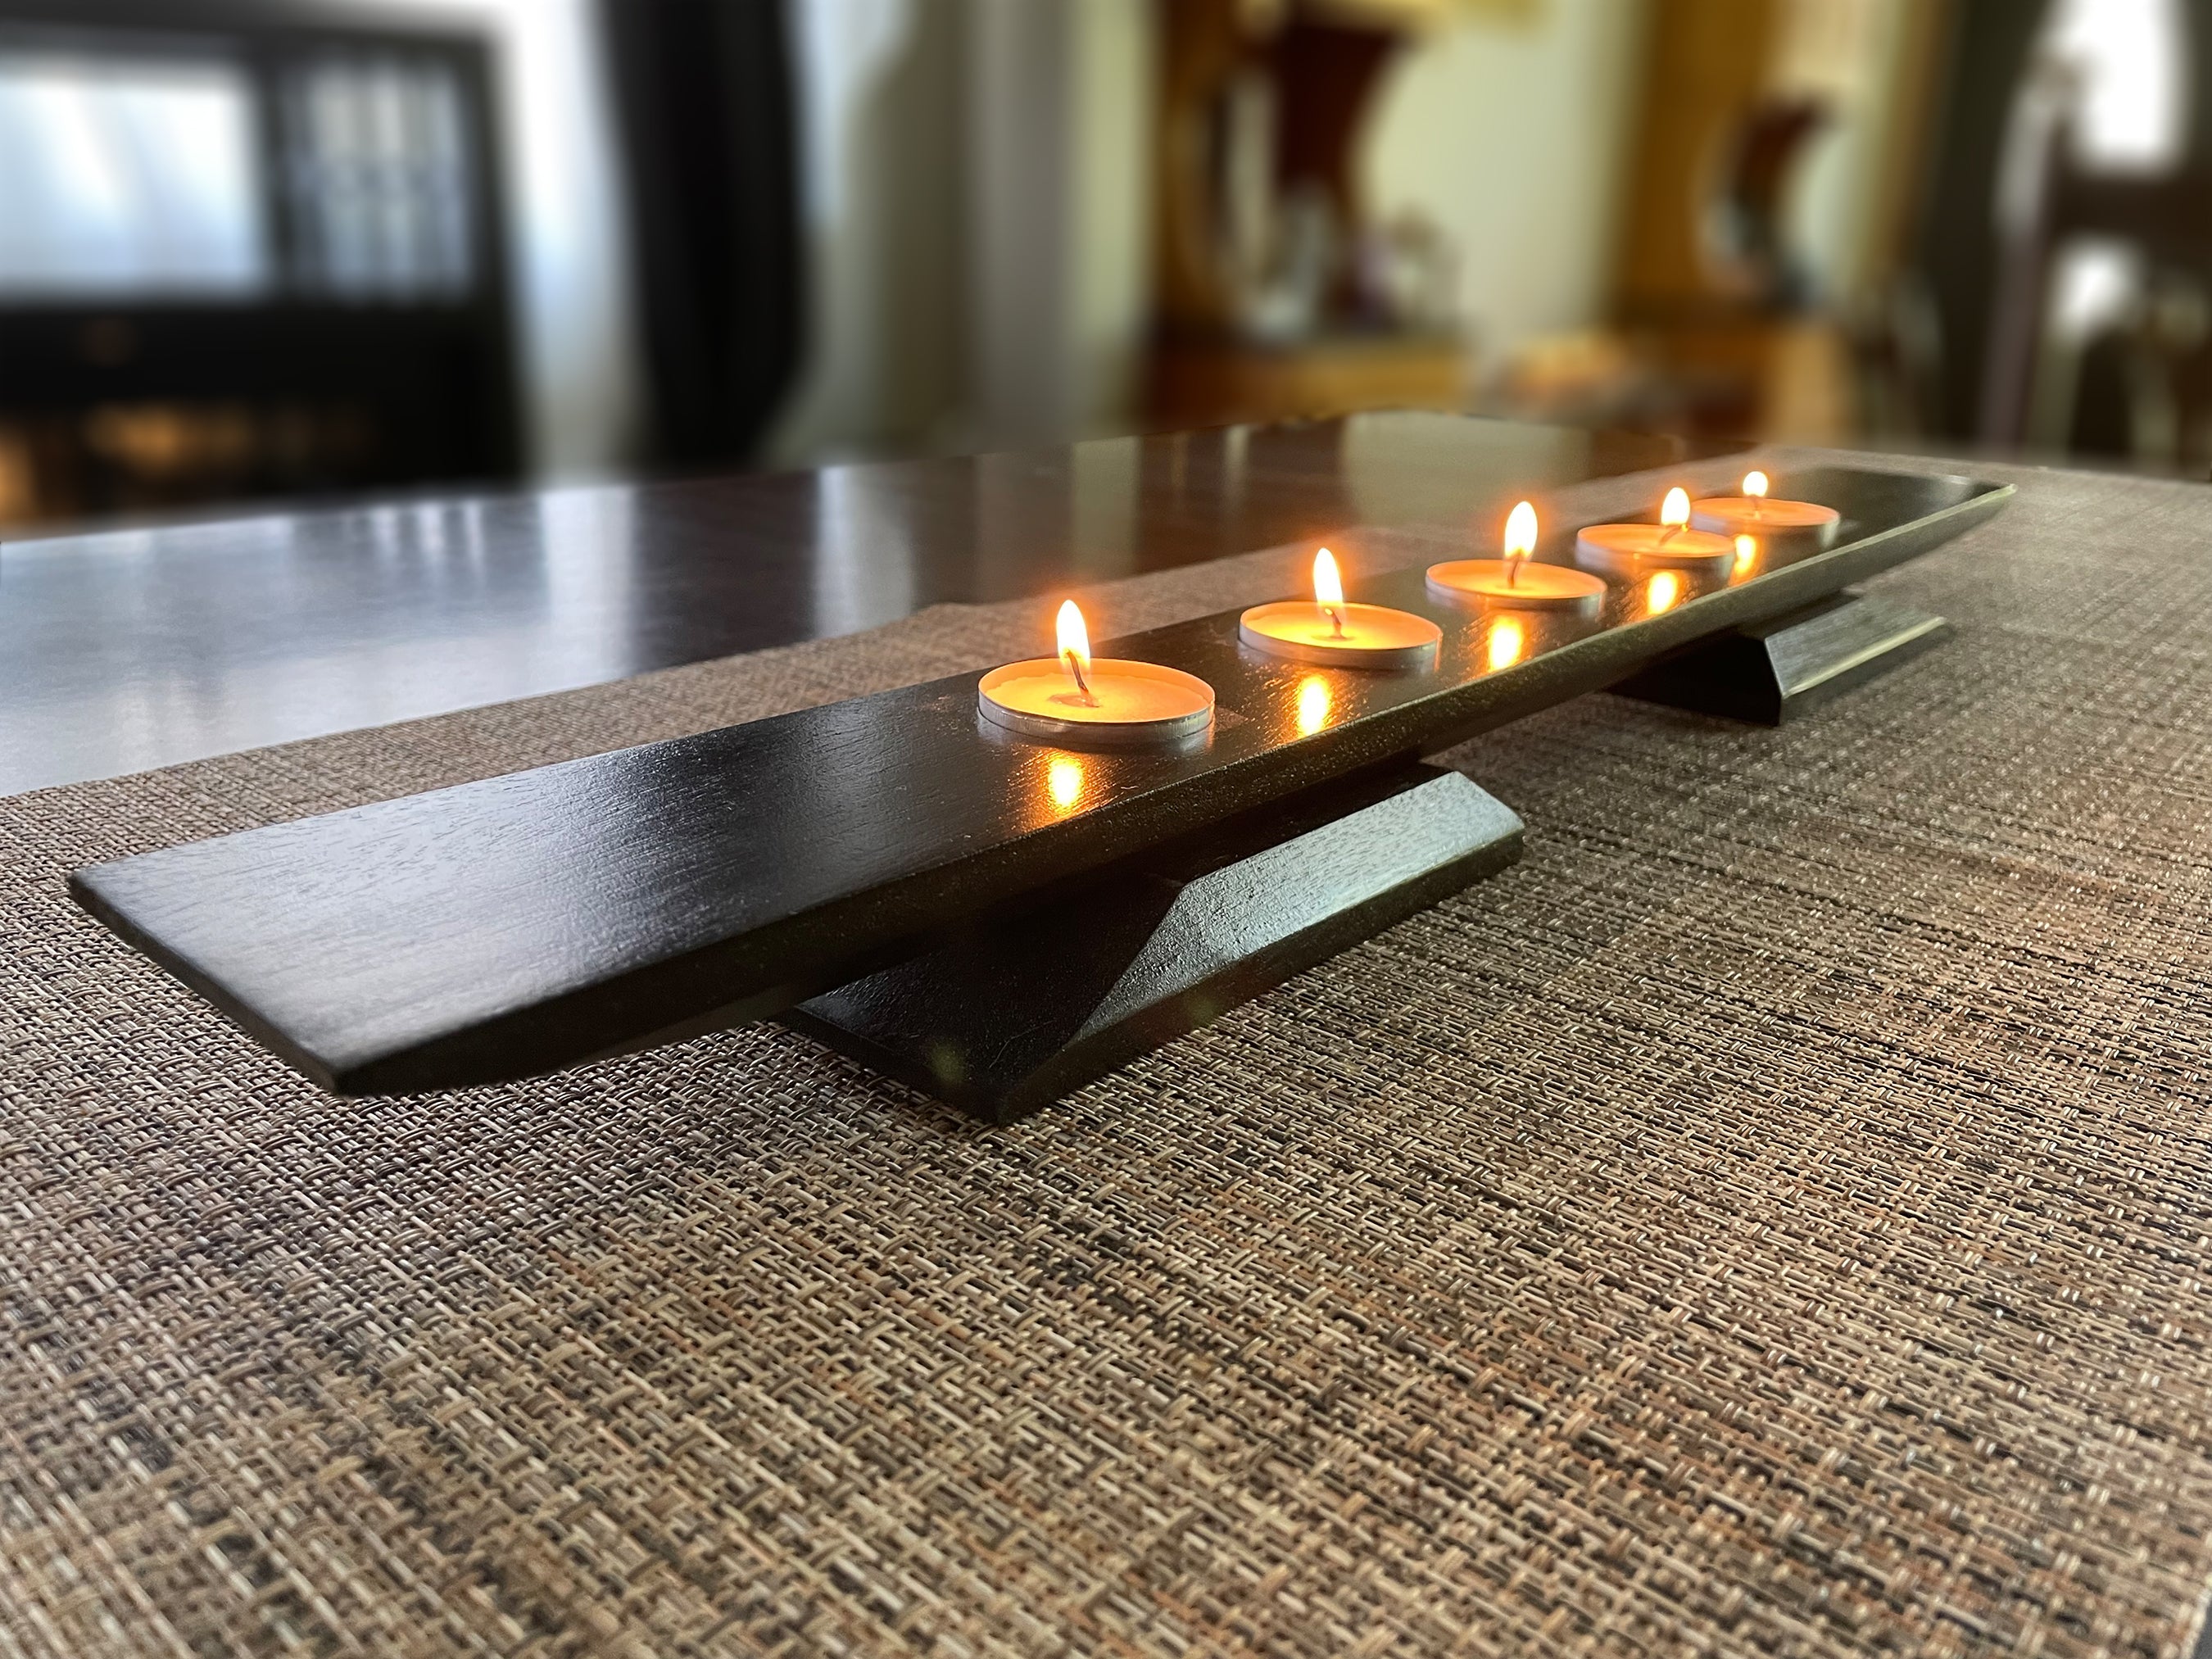 Illuminate Your Home with Handmade Black Candle Holders